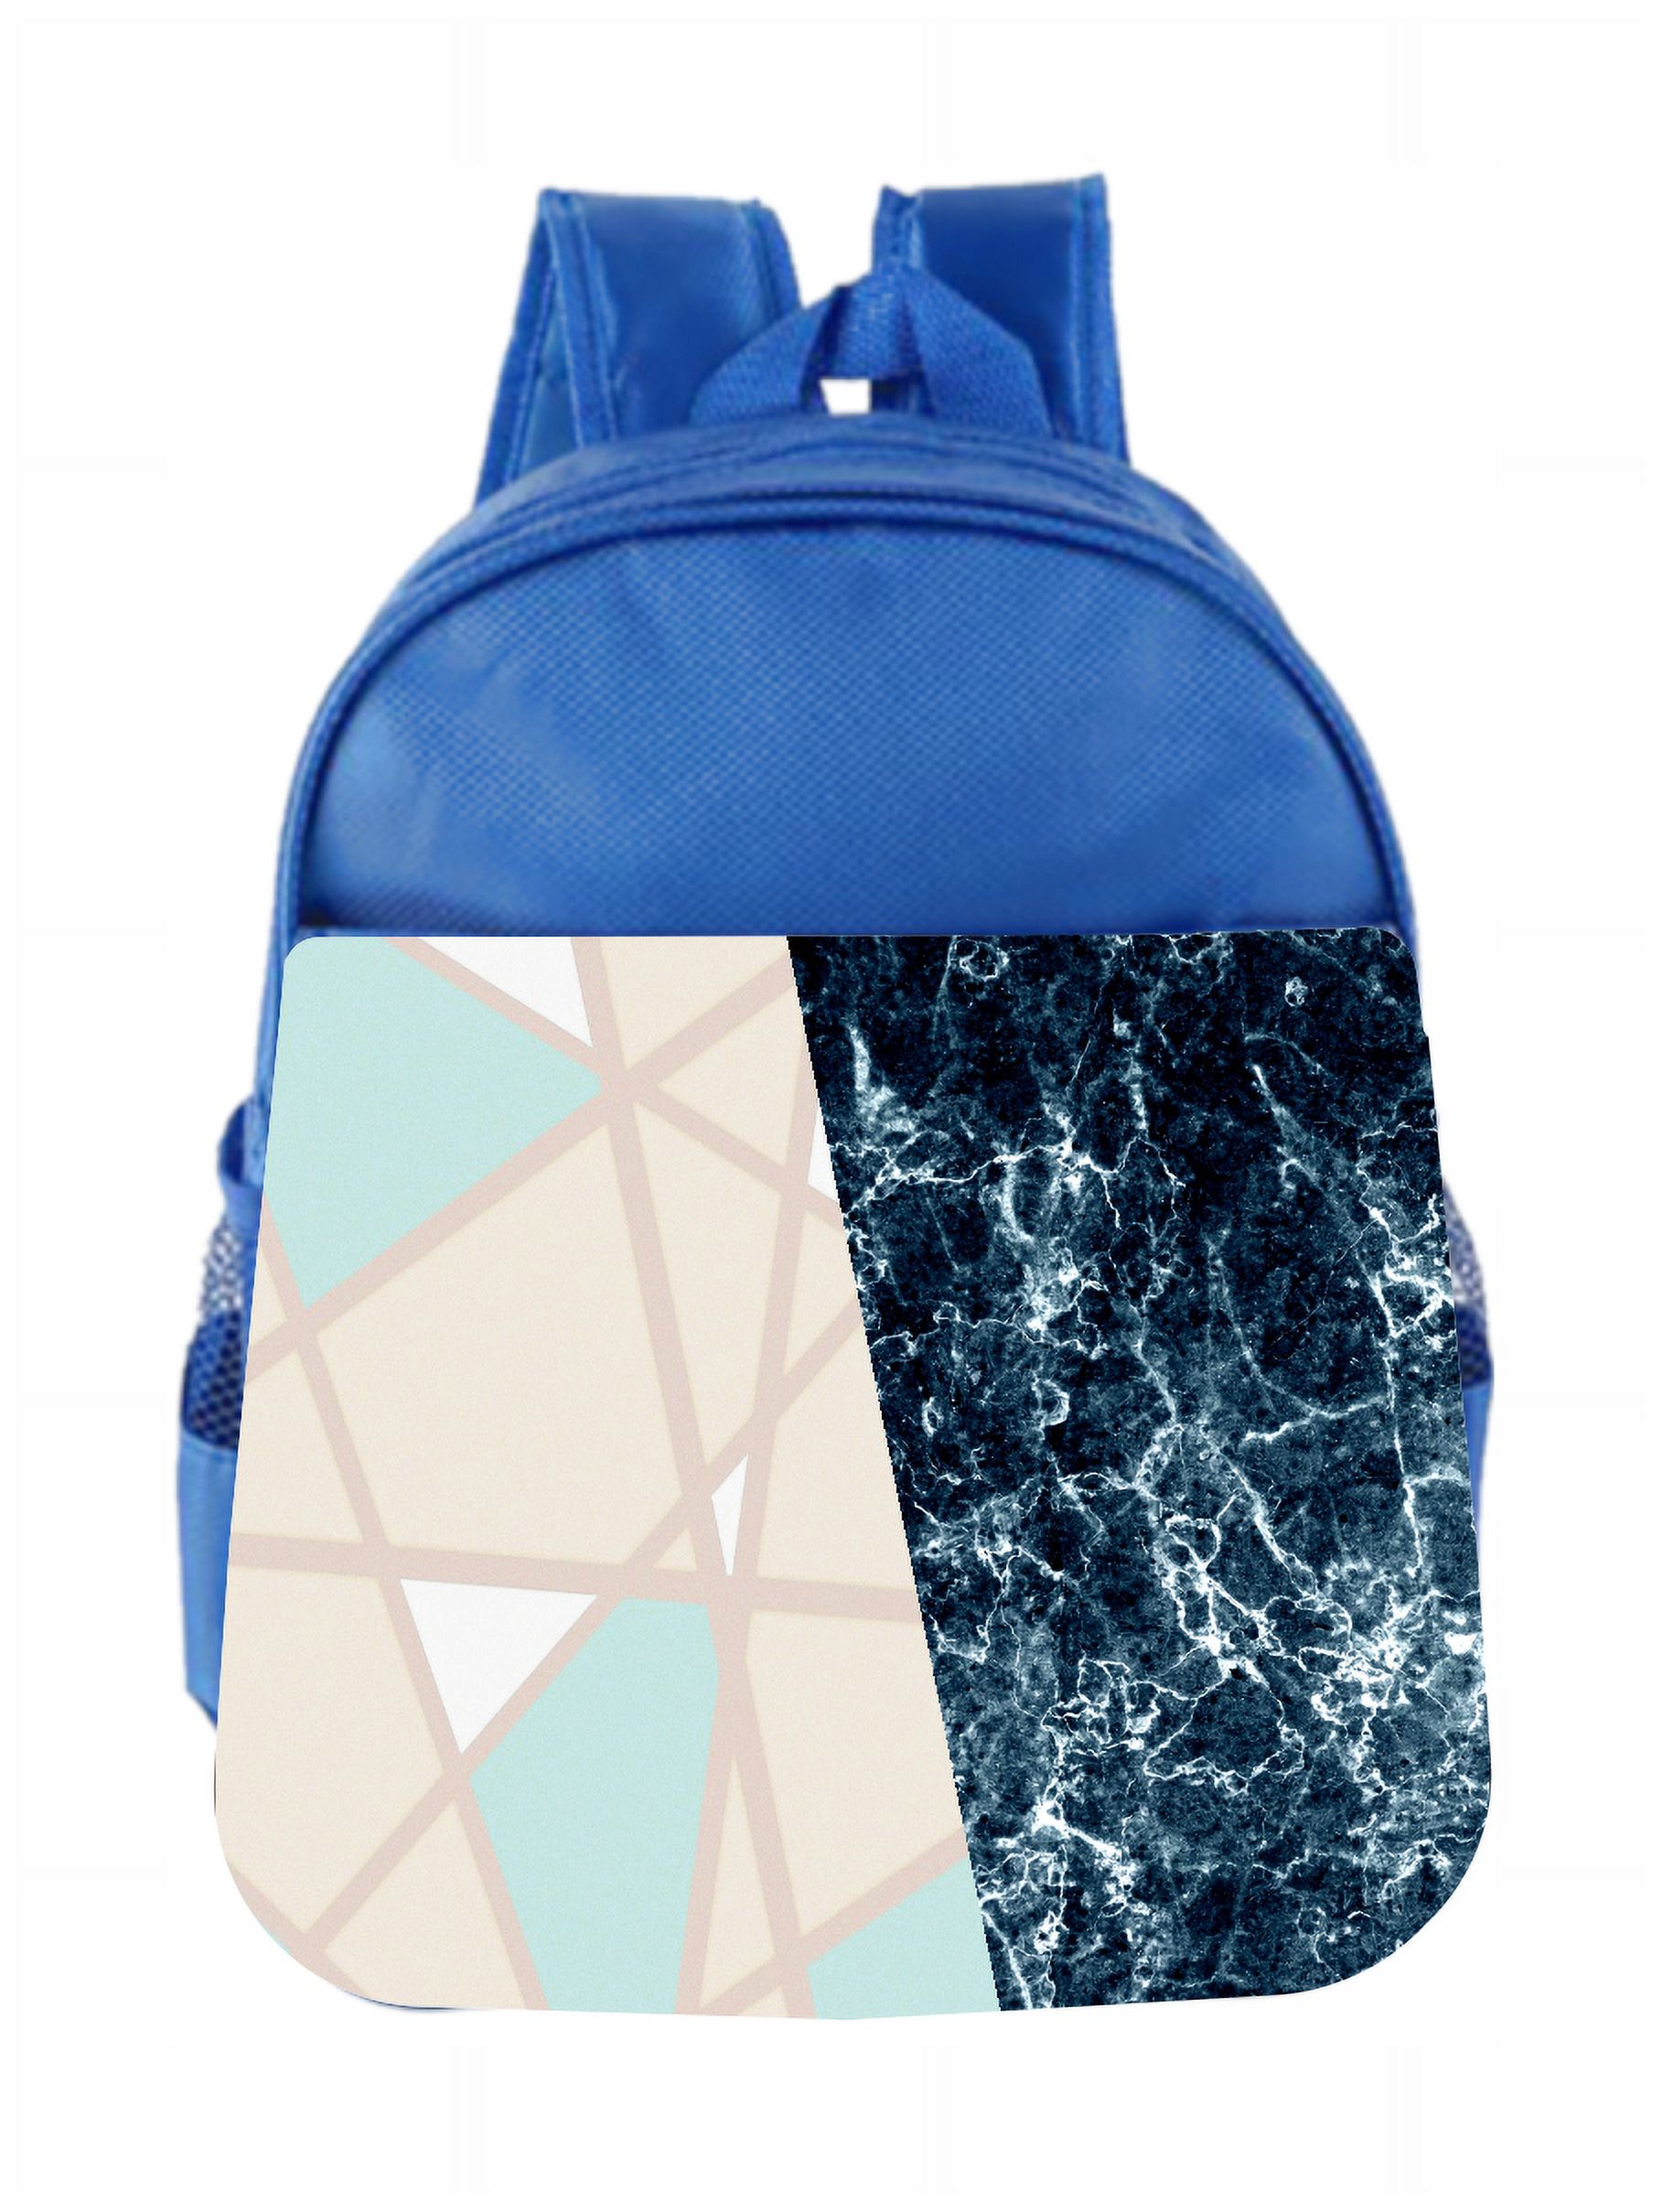 Marble Geometric Colorblock Kids Backpack Toddler - image 1 of 4